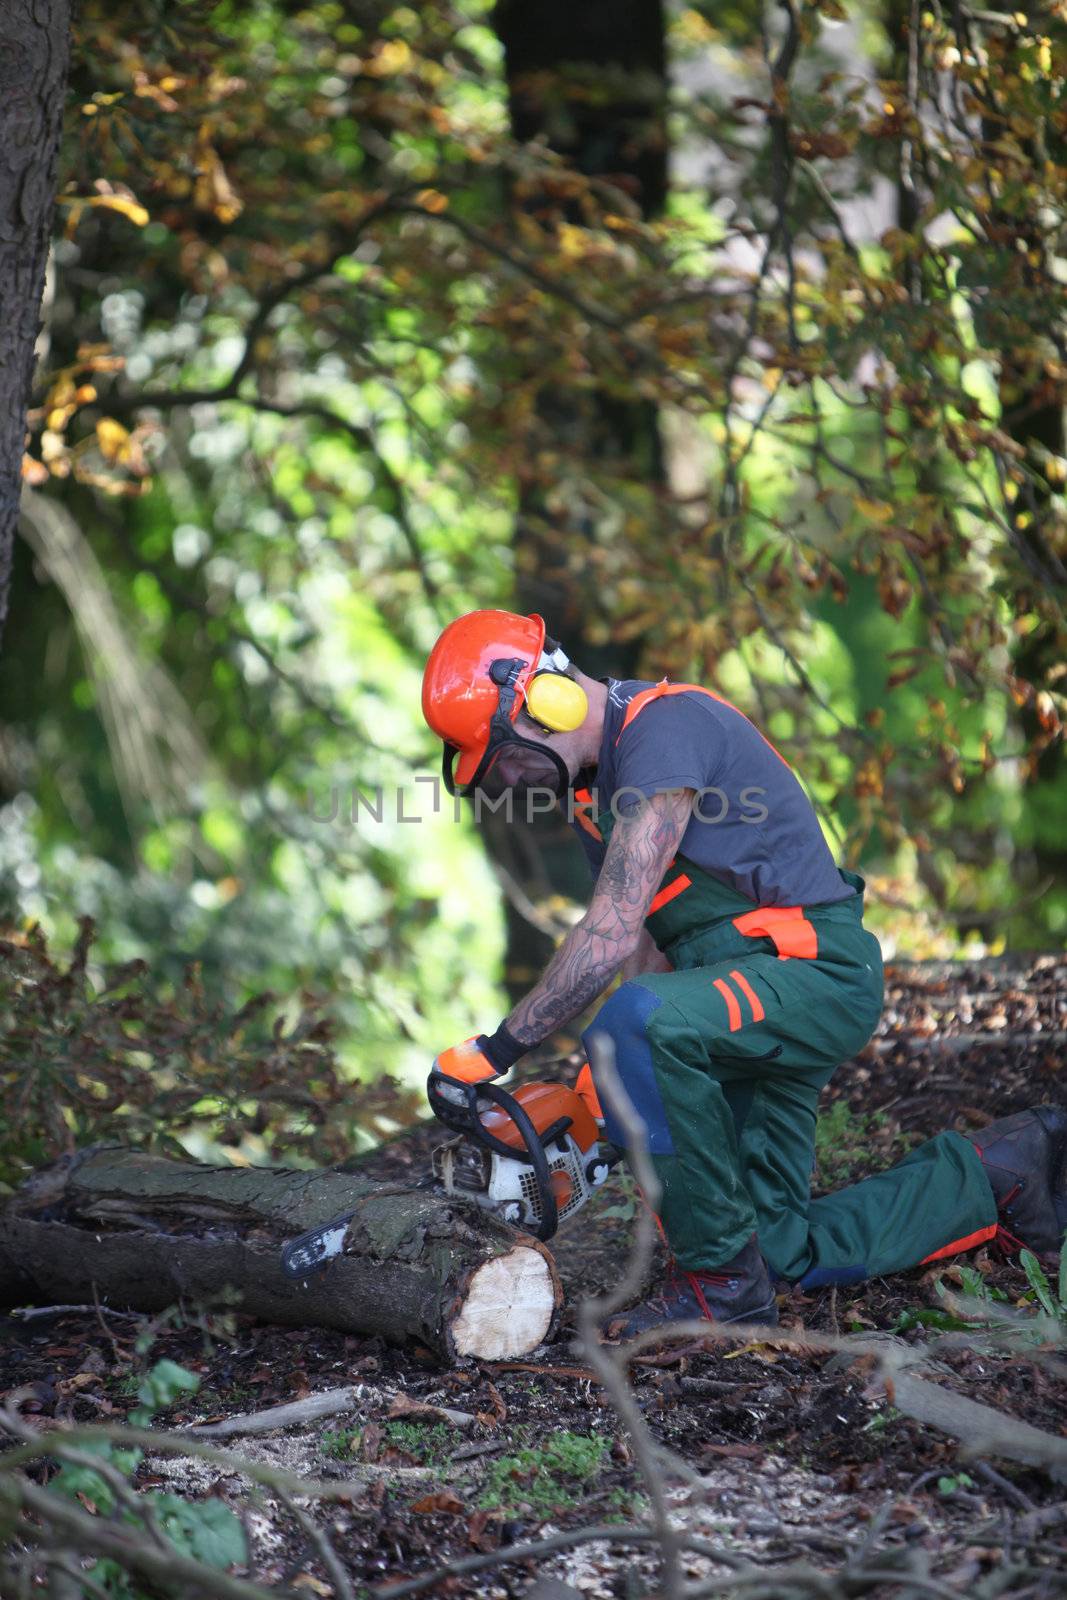 A forestry worker sawing a tree trunk. He is wearing protective clothing